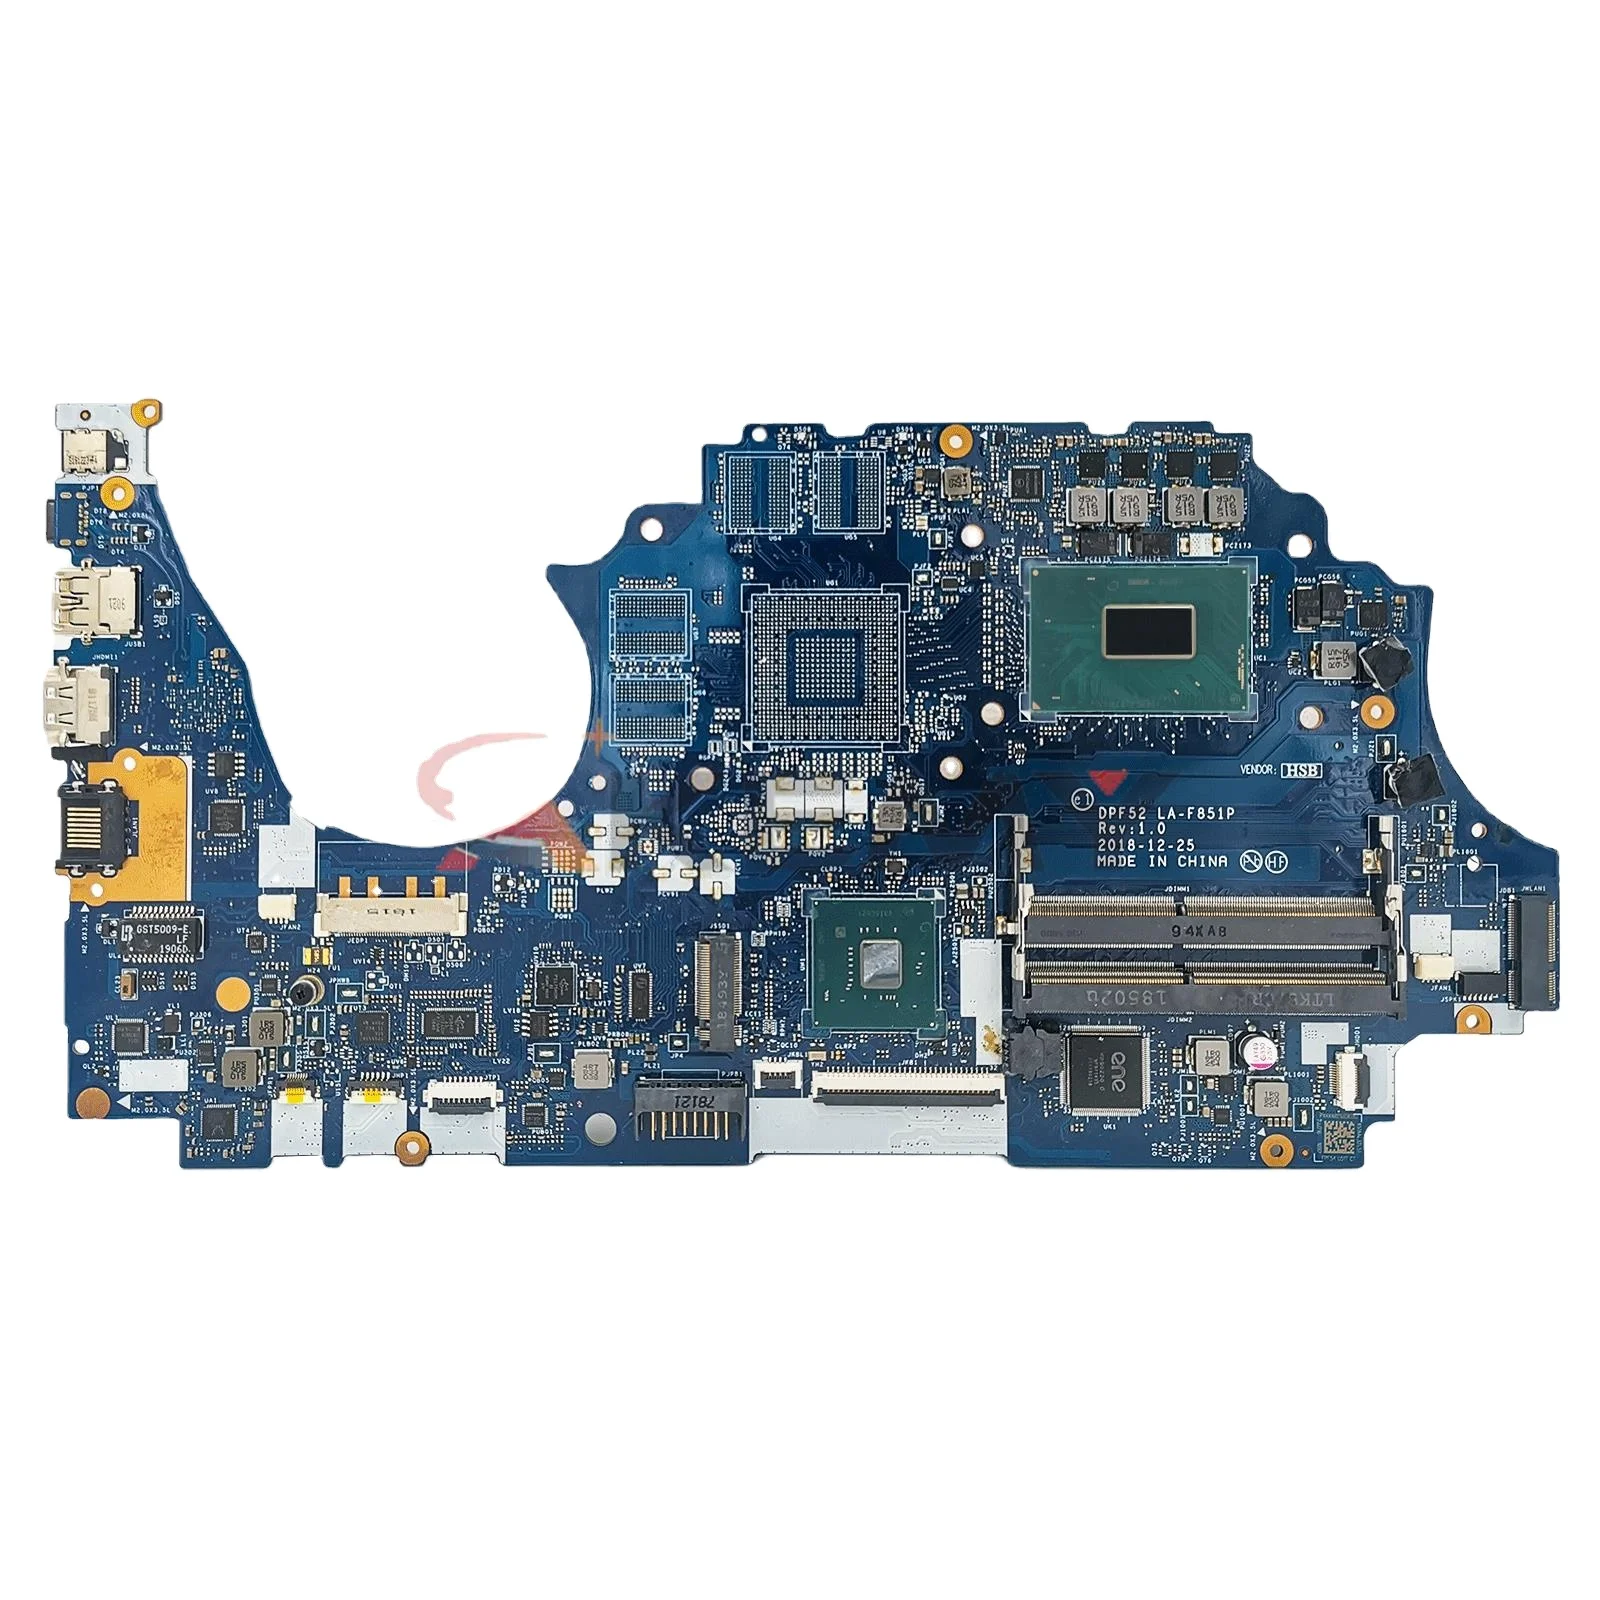 

L25090-601 For HP Zbook 15V G5 Laptop Motherboard DPF52 LA-F851P I5-8300H I7-8750H CPU DDR4 N18M-Q3-A1 100% Tested